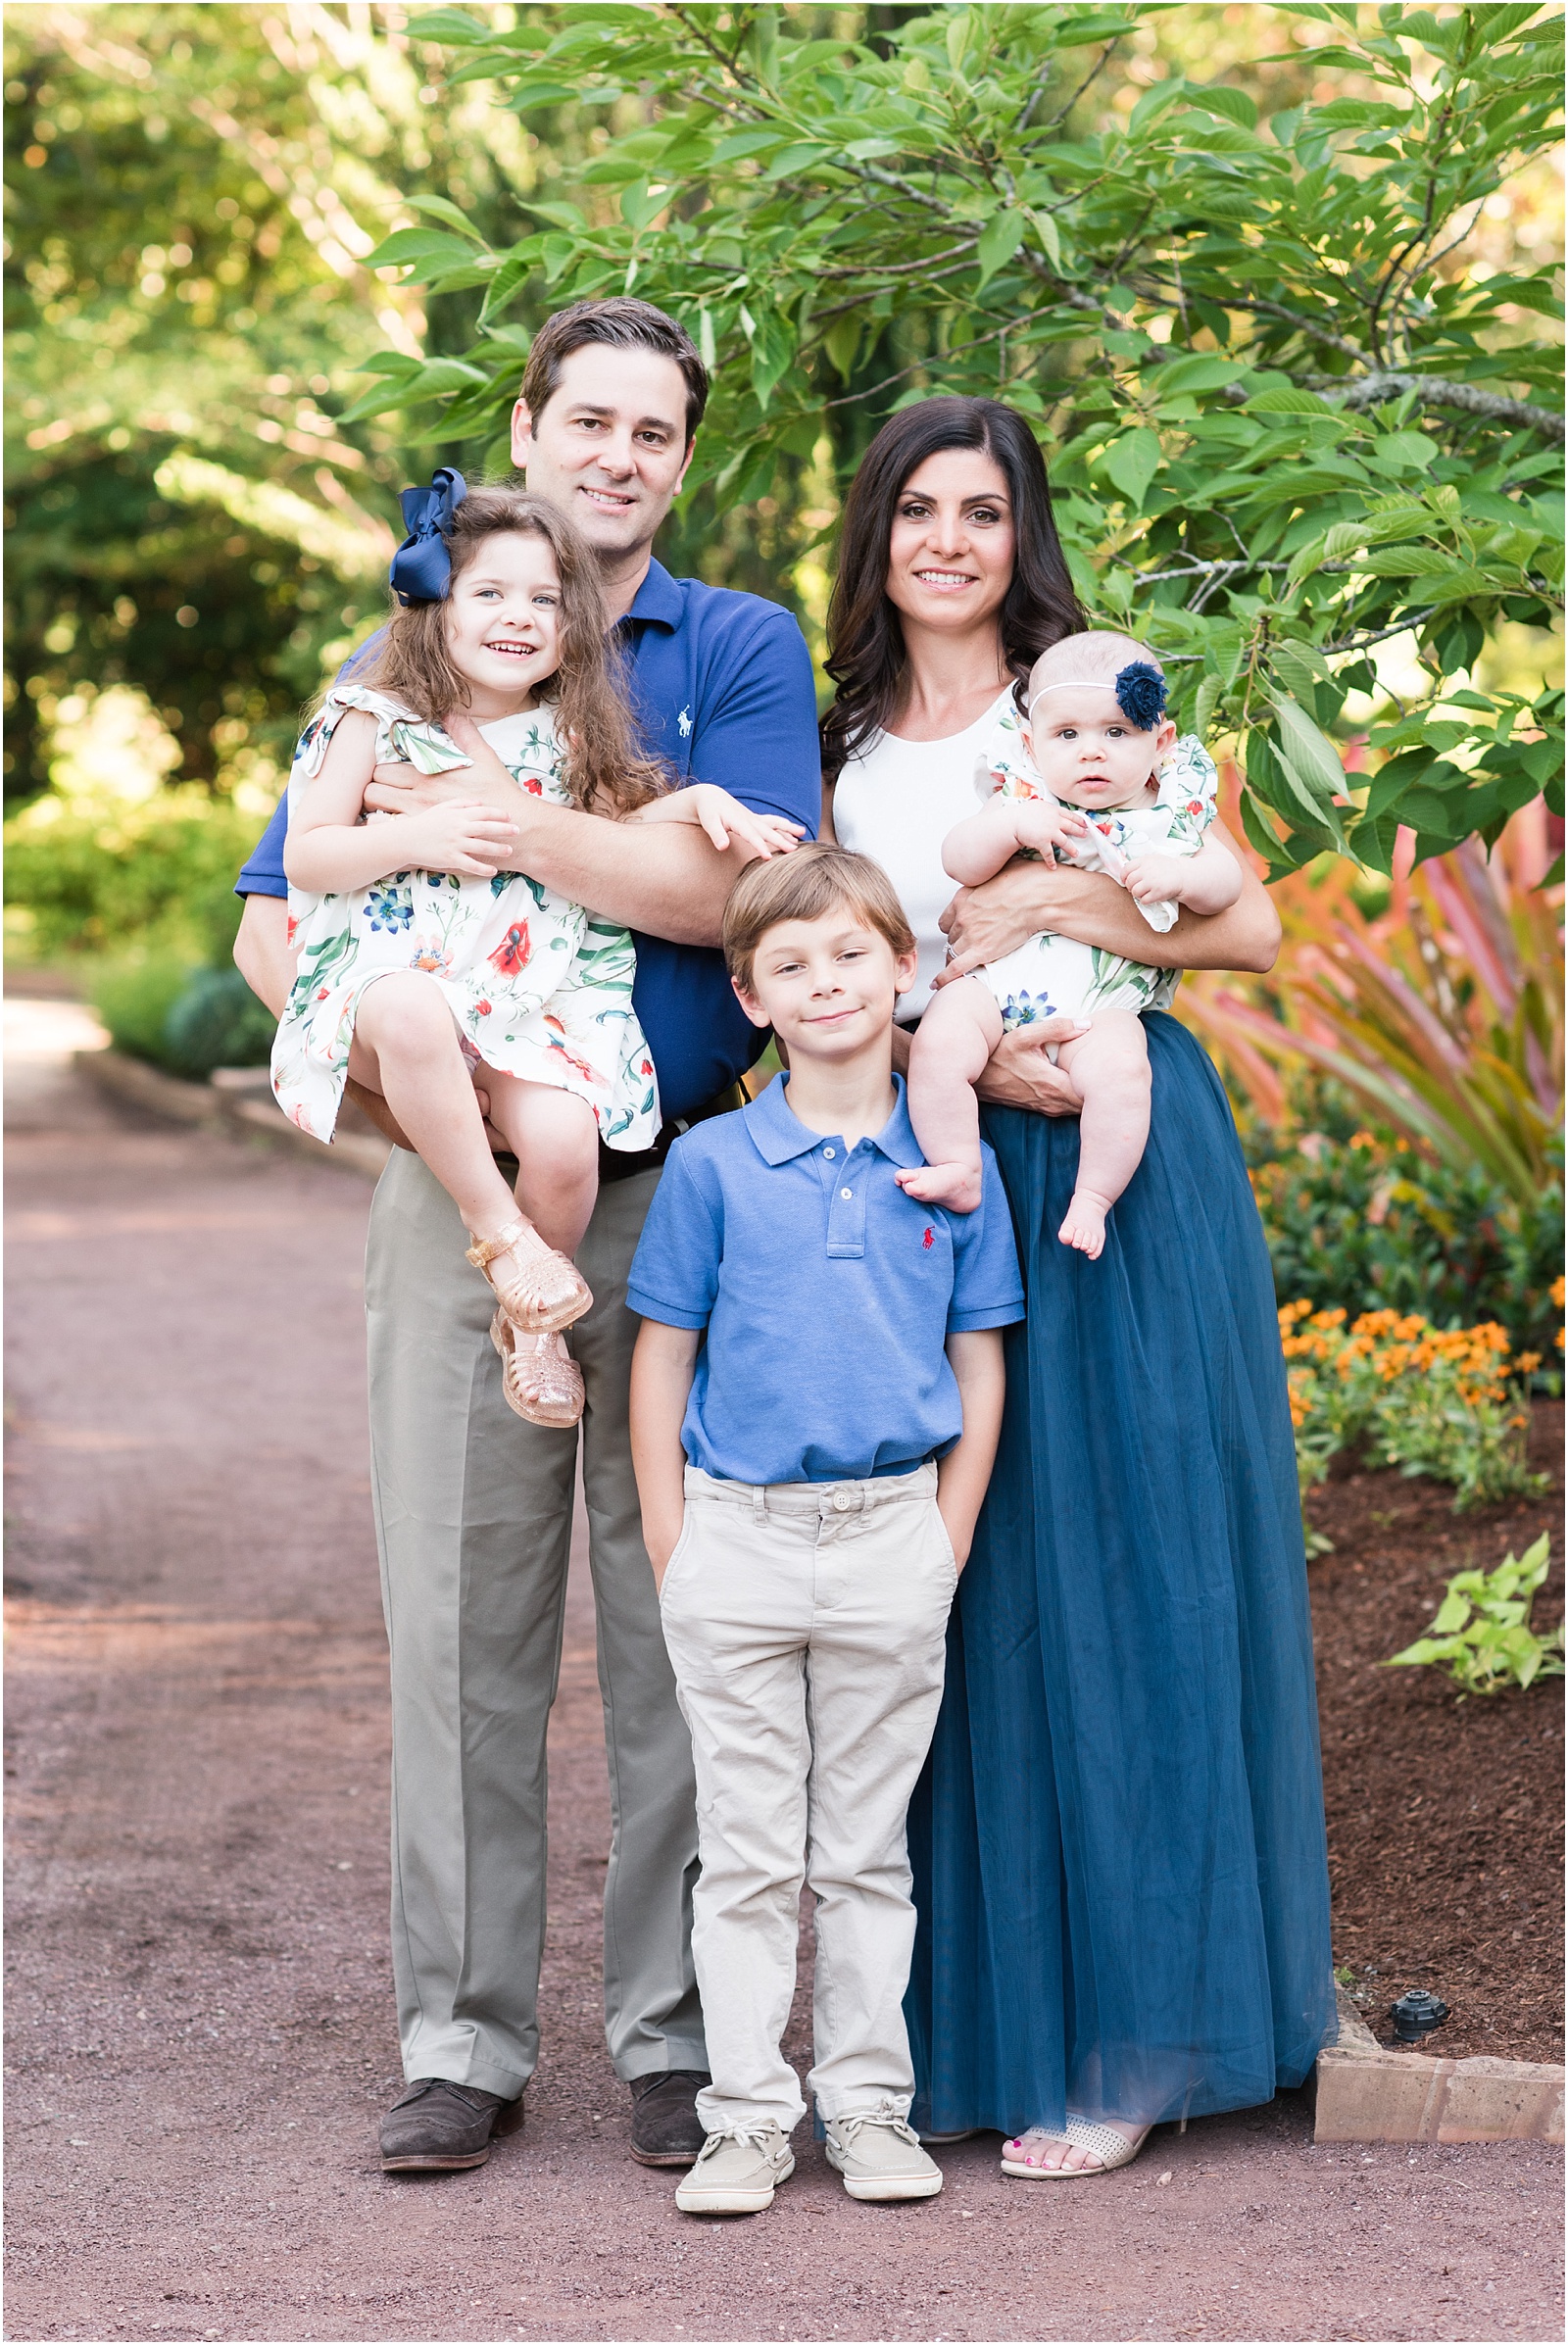 A family formal photograph with two kids and a baby at Duke Gardens